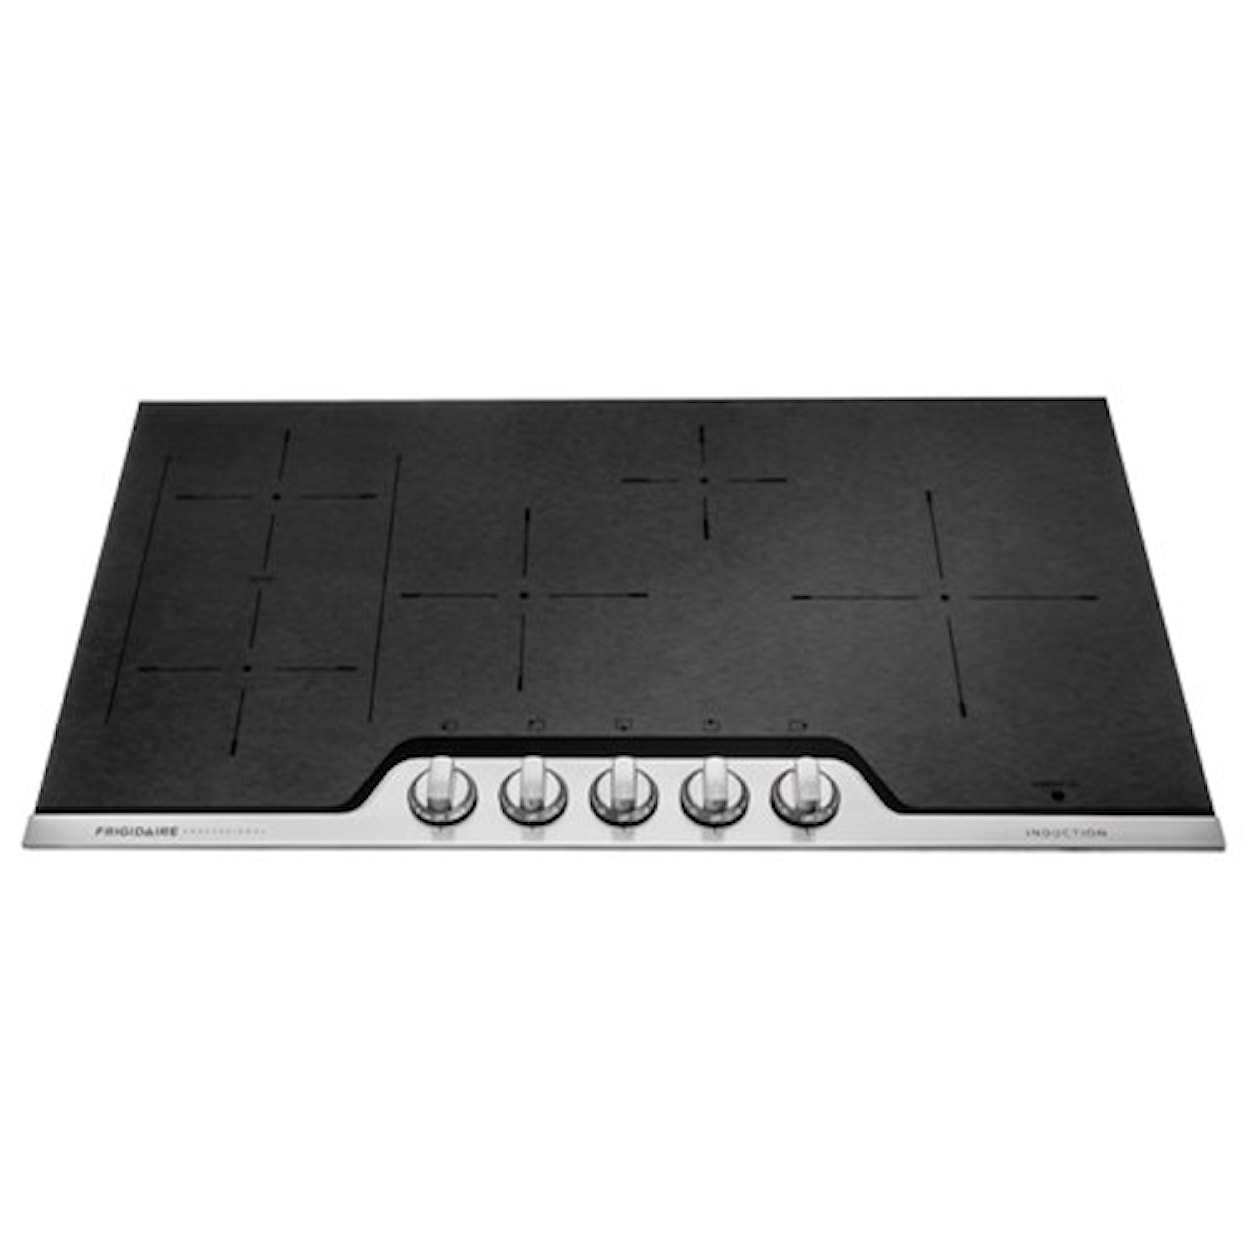 Frigidaire Professional Collection - Cooktops 36" Induction Cooktop